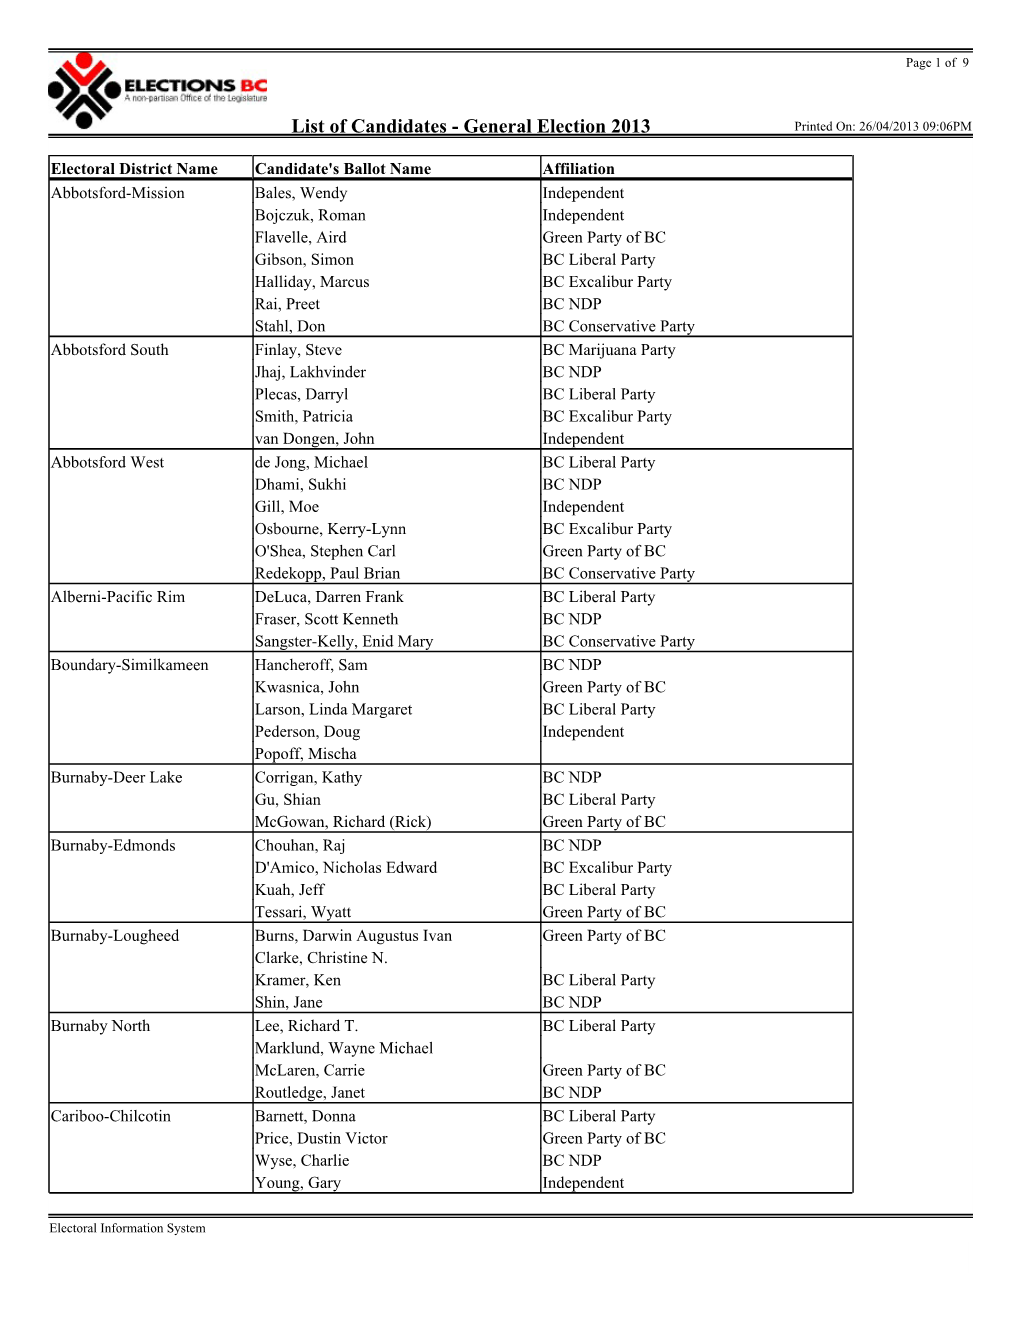 List of Candidates - General Election 2013 Printed On: 26/04/2013 09:06PM